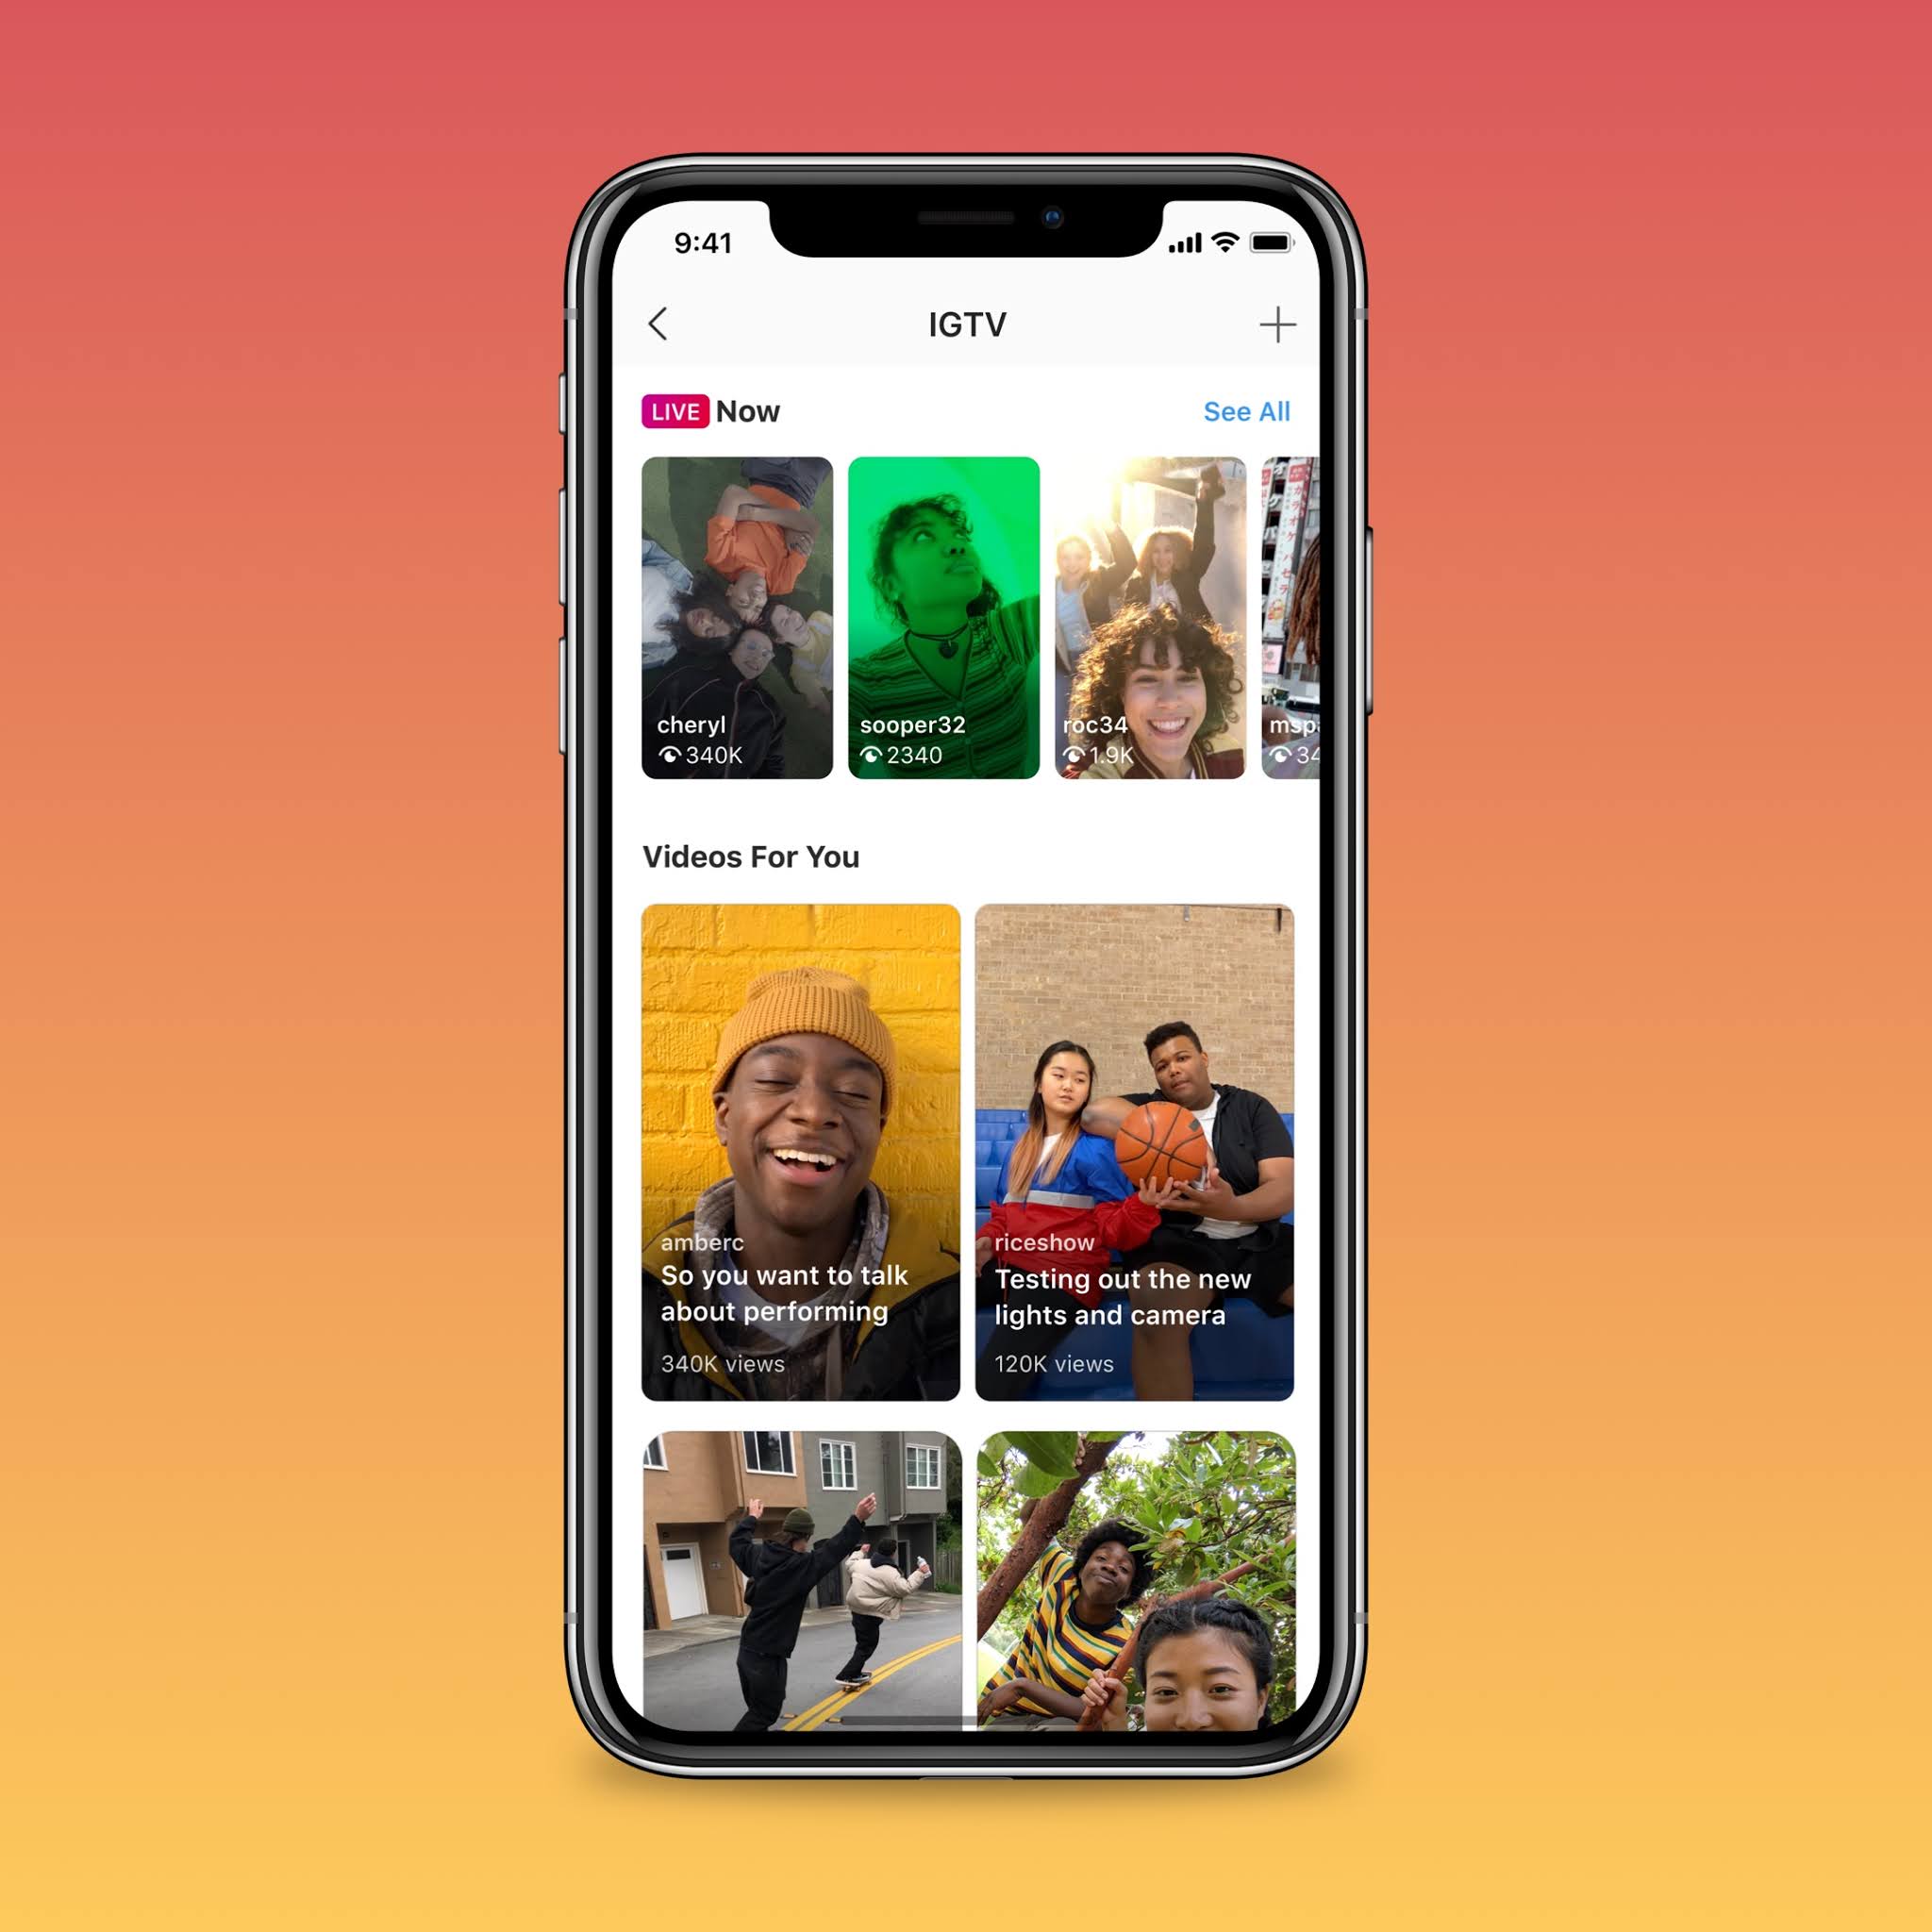 Instagram adds two new feathers in the IG Live streaming hat, including an extension in the streams time length and a new archiving option